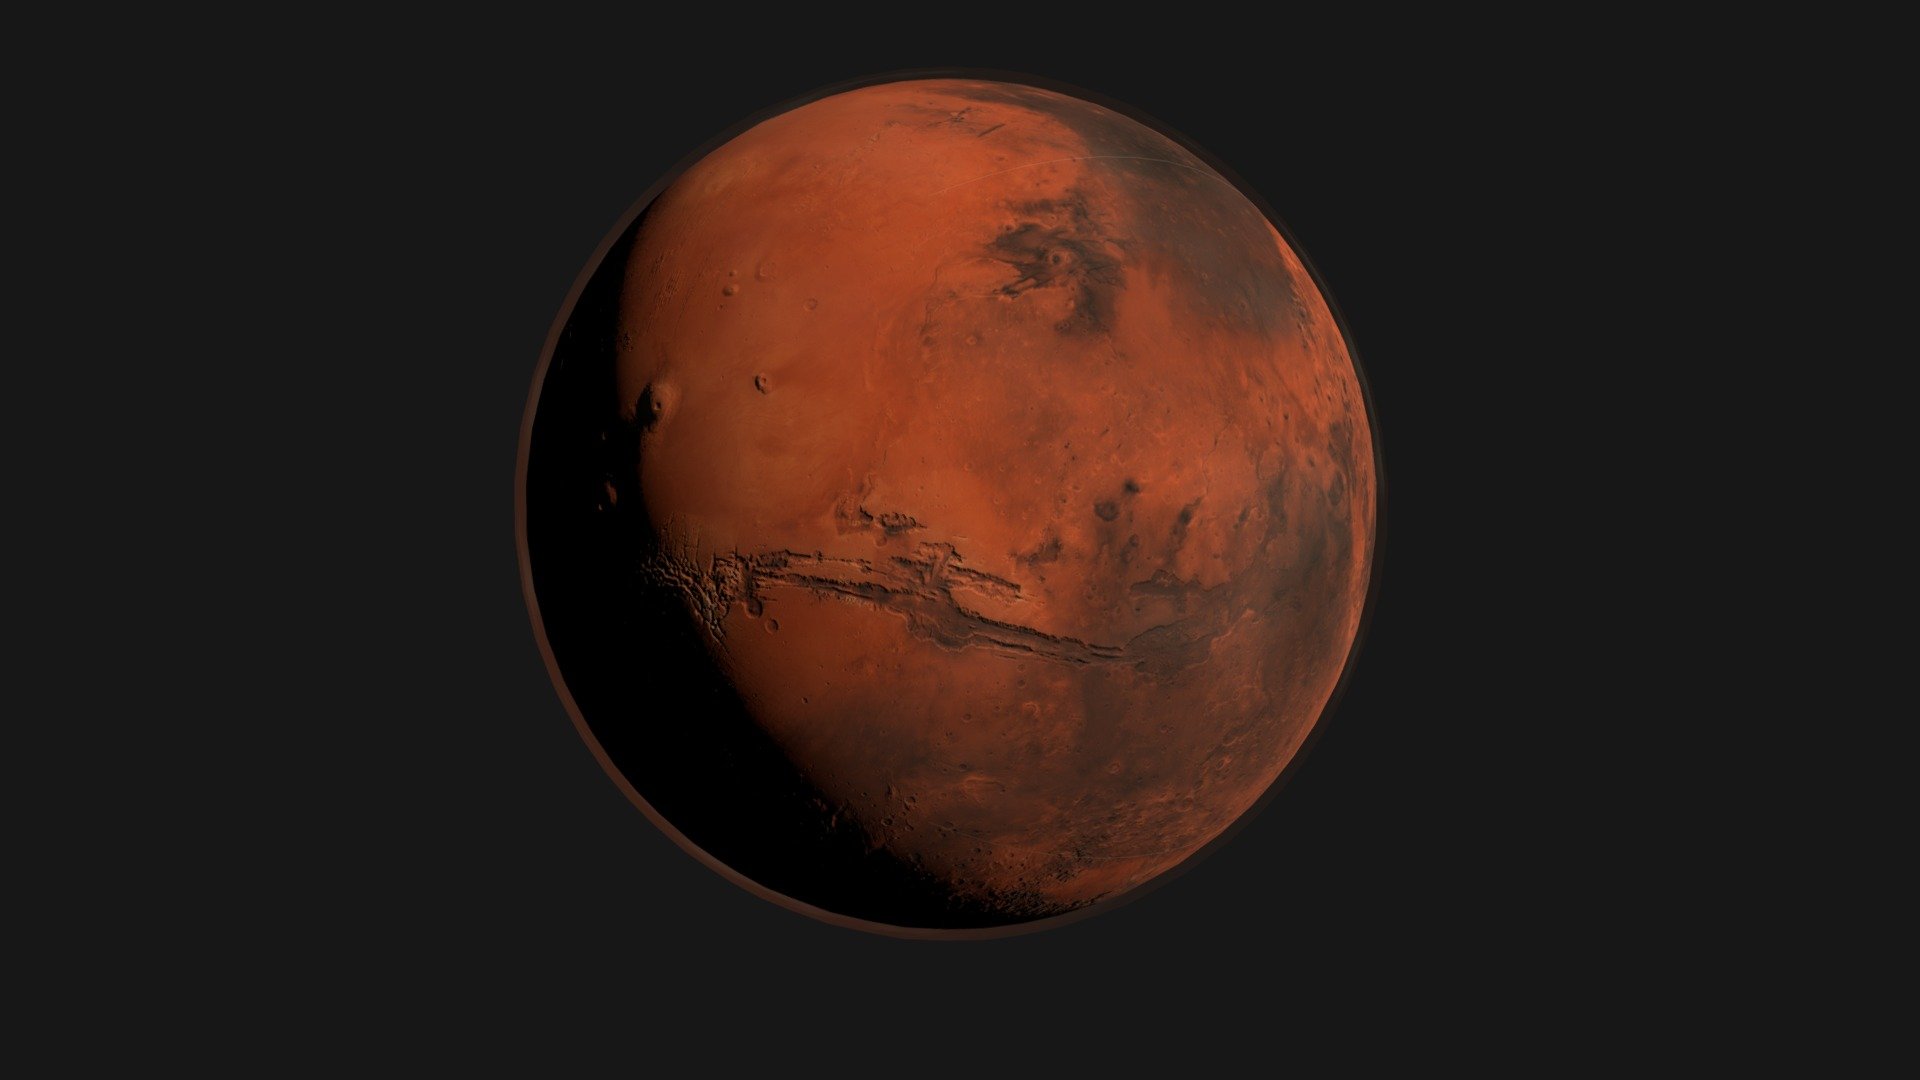 Mars planet with surface details, clouds and atmosphere layers. The clouds and planet ground are animated 3d model